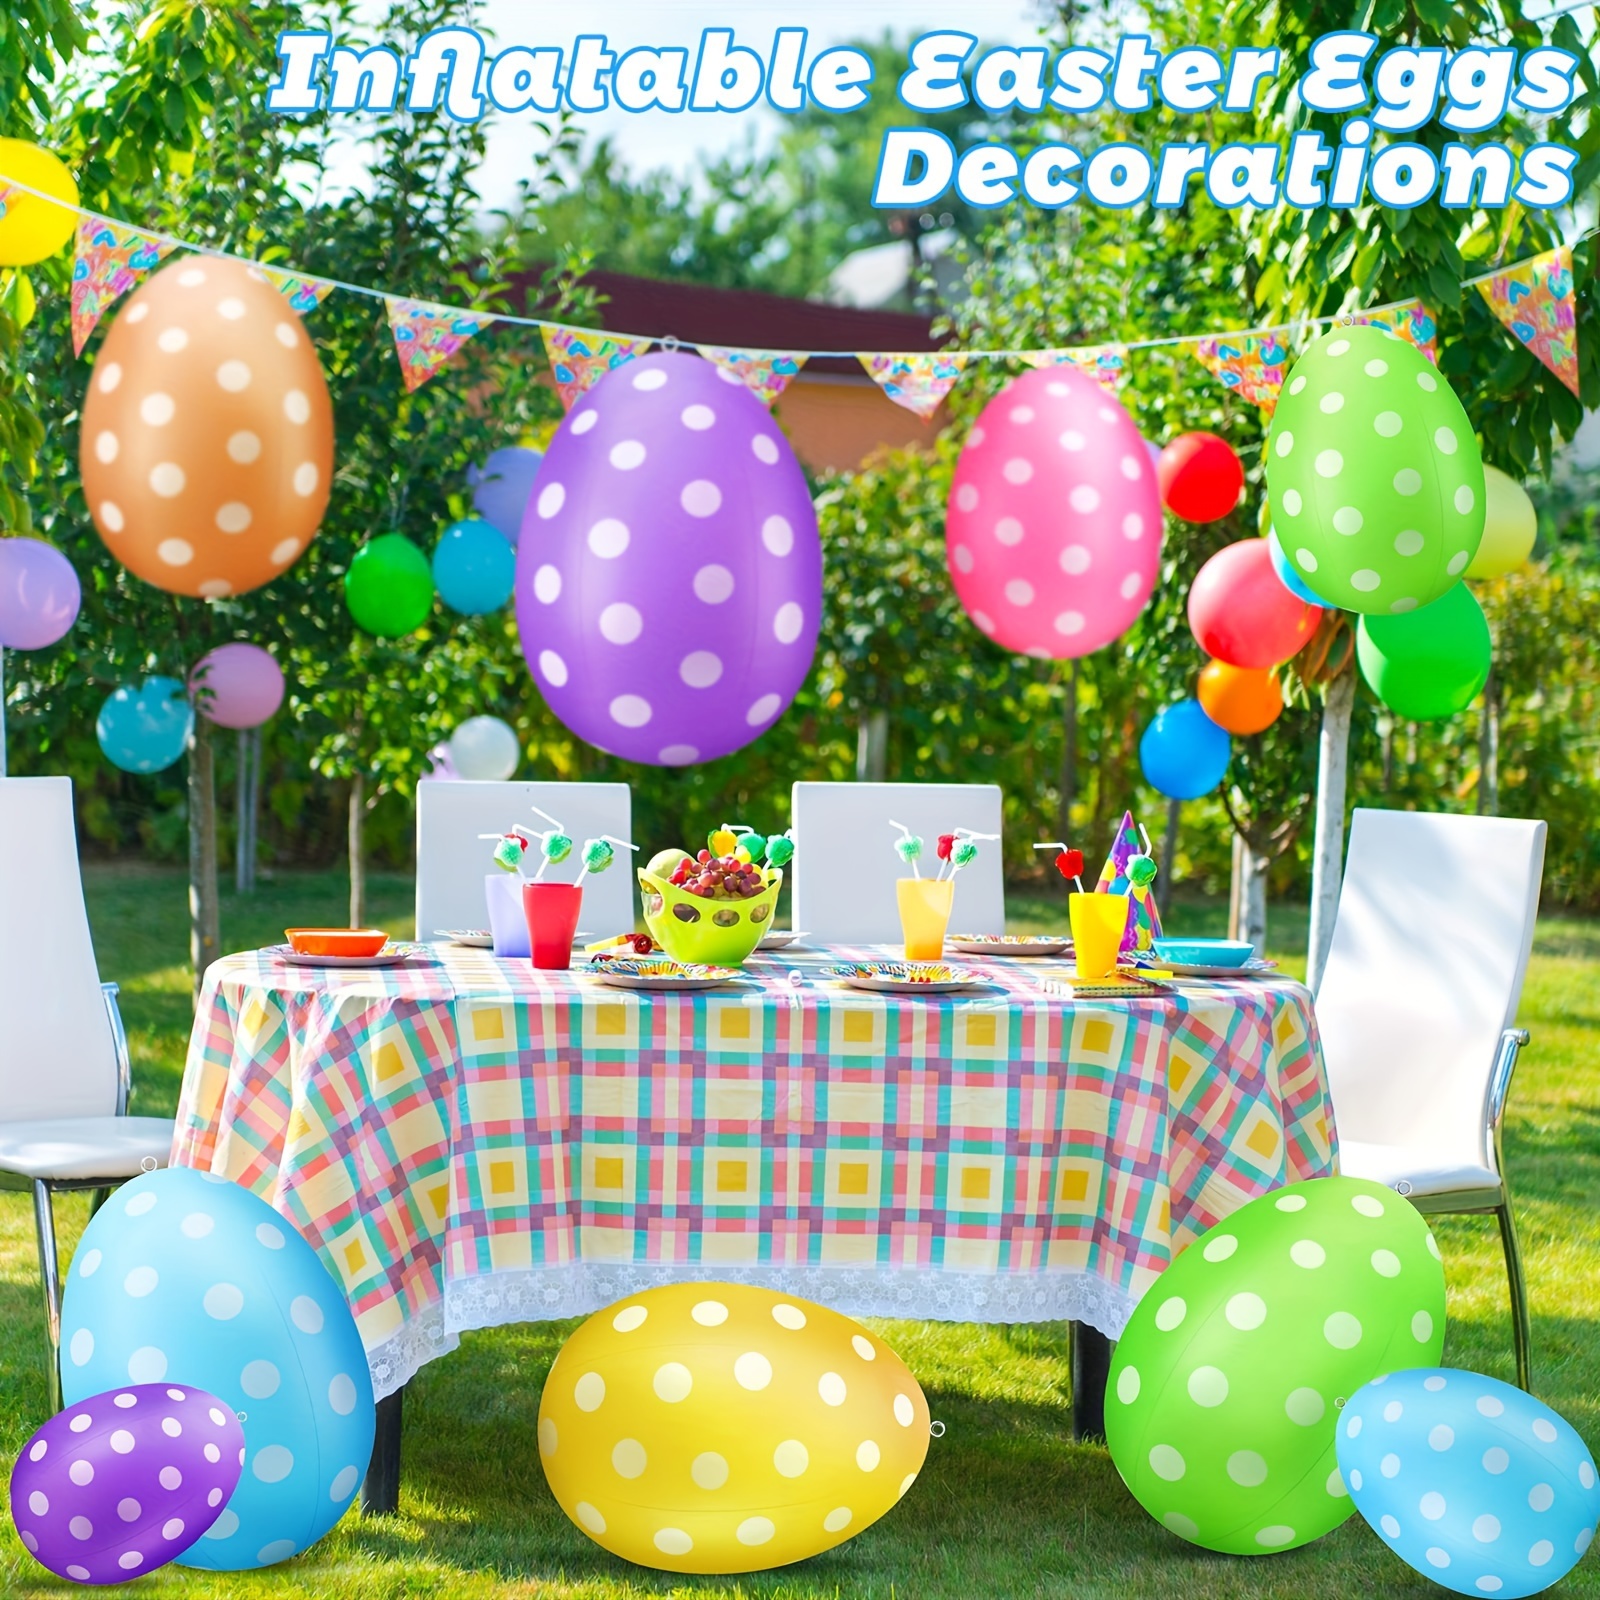  Ferraycle 16 Pcs Easter Decorations Outdoor Easter